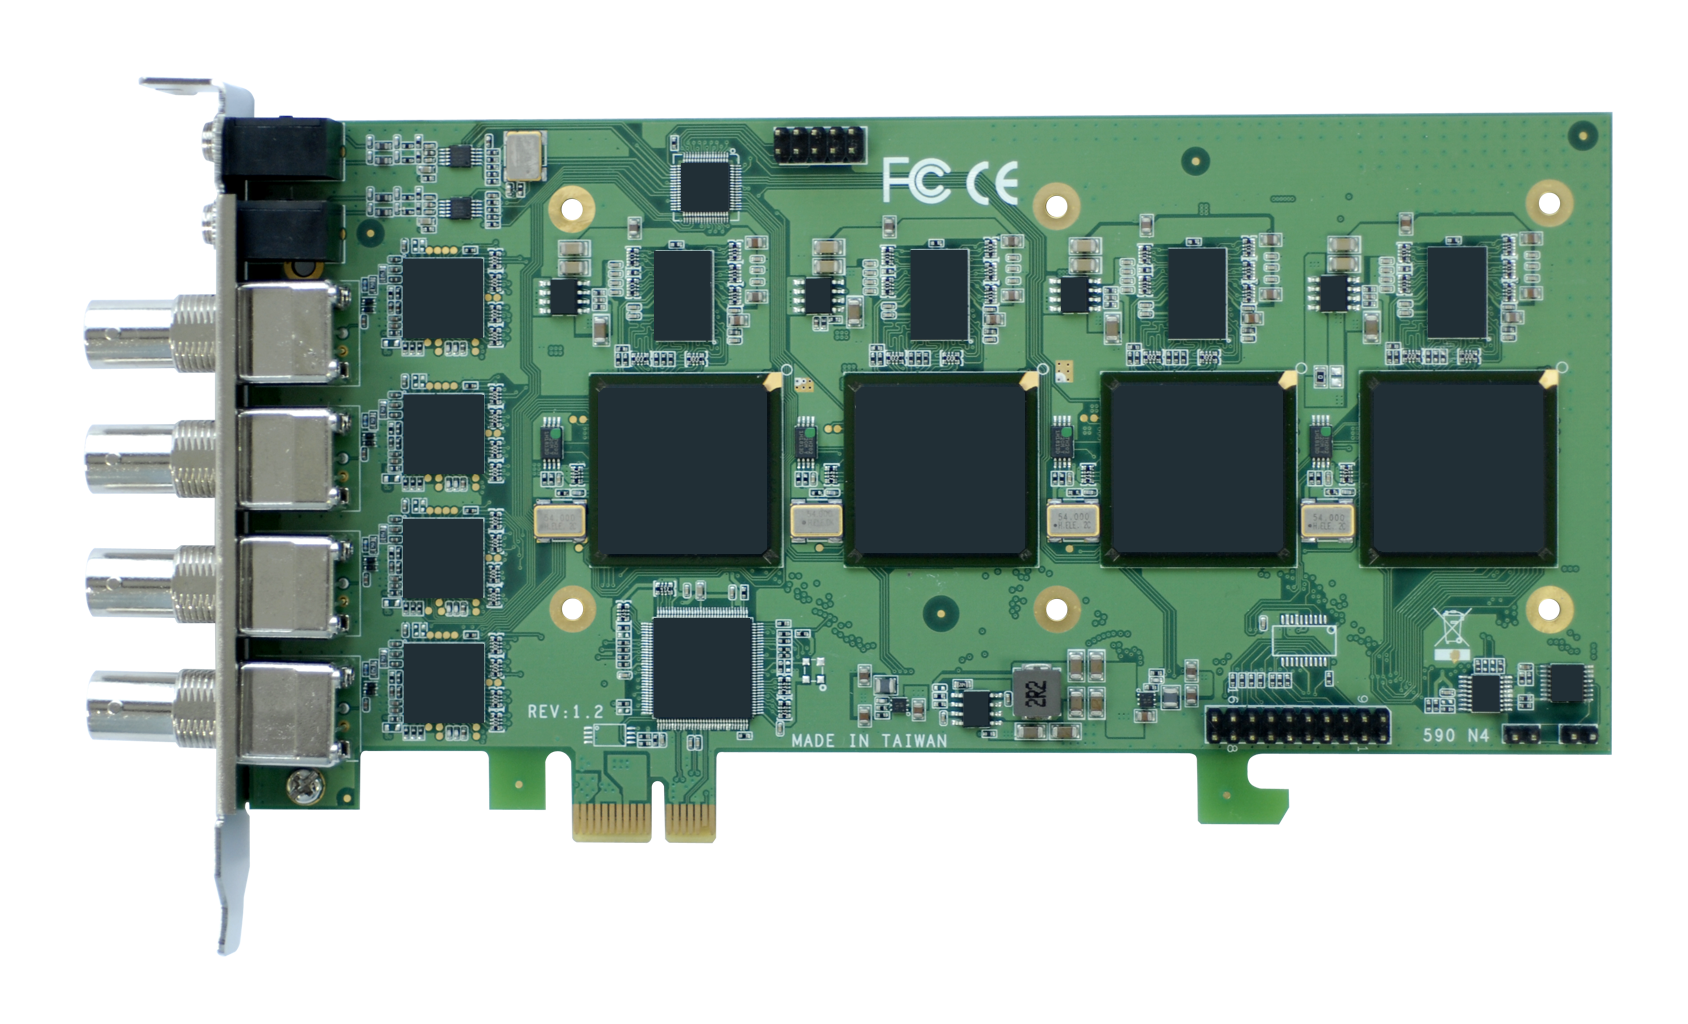 4-Channel Full HD Low-Power PCIex1 HW Video Compression Card with SDK